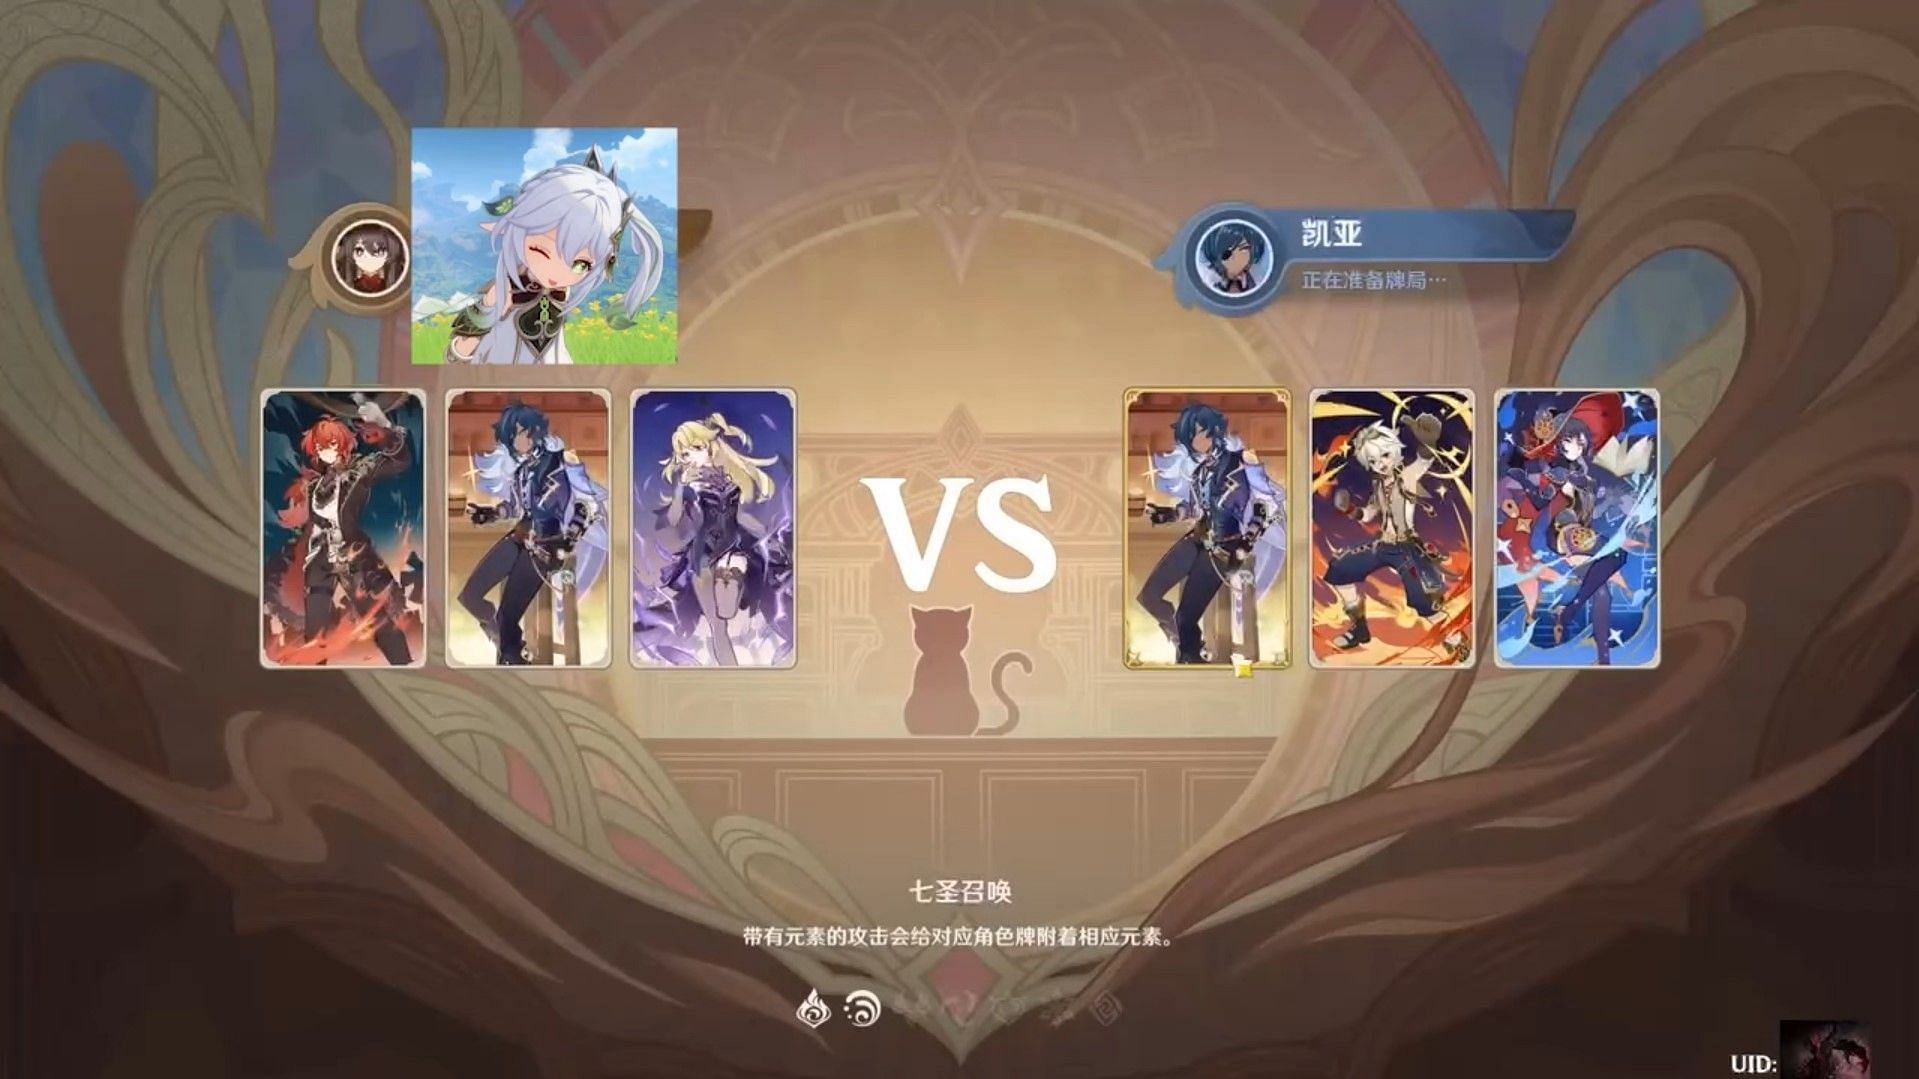 Both players have three character cards (Image via Unknown)